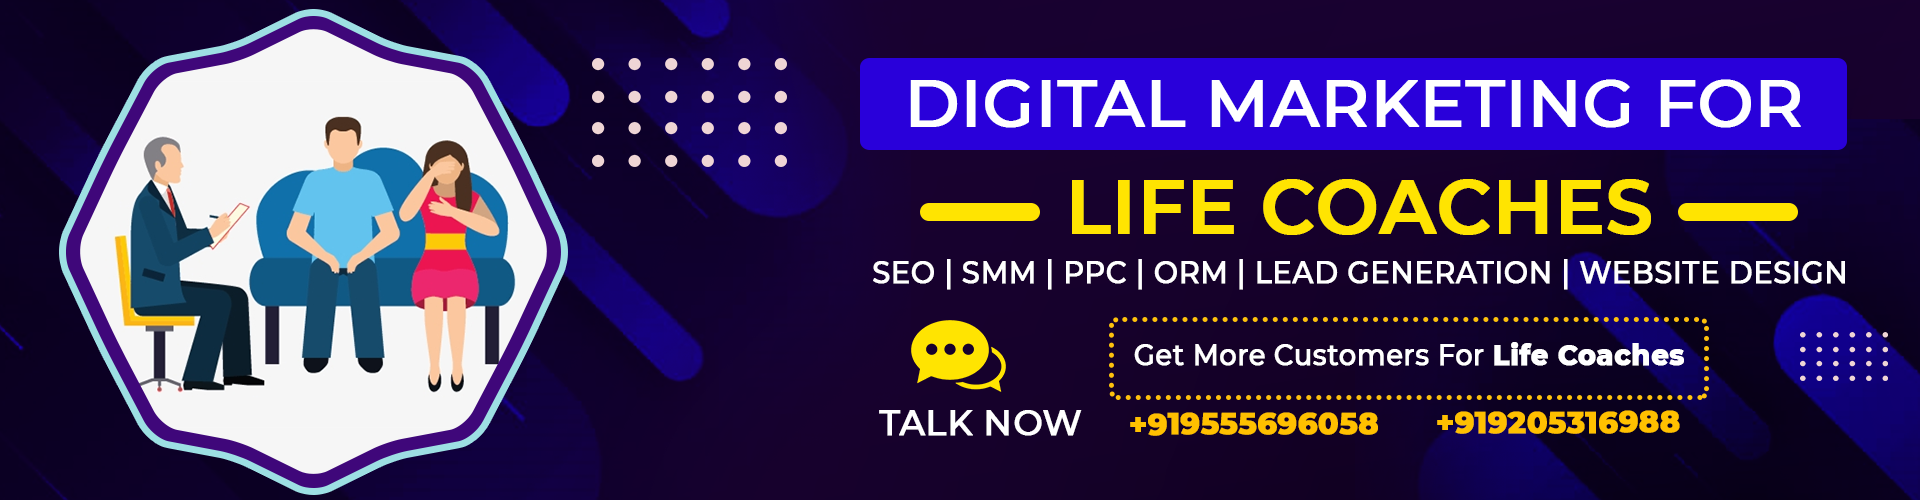 digital-marketing-for-life-coaches